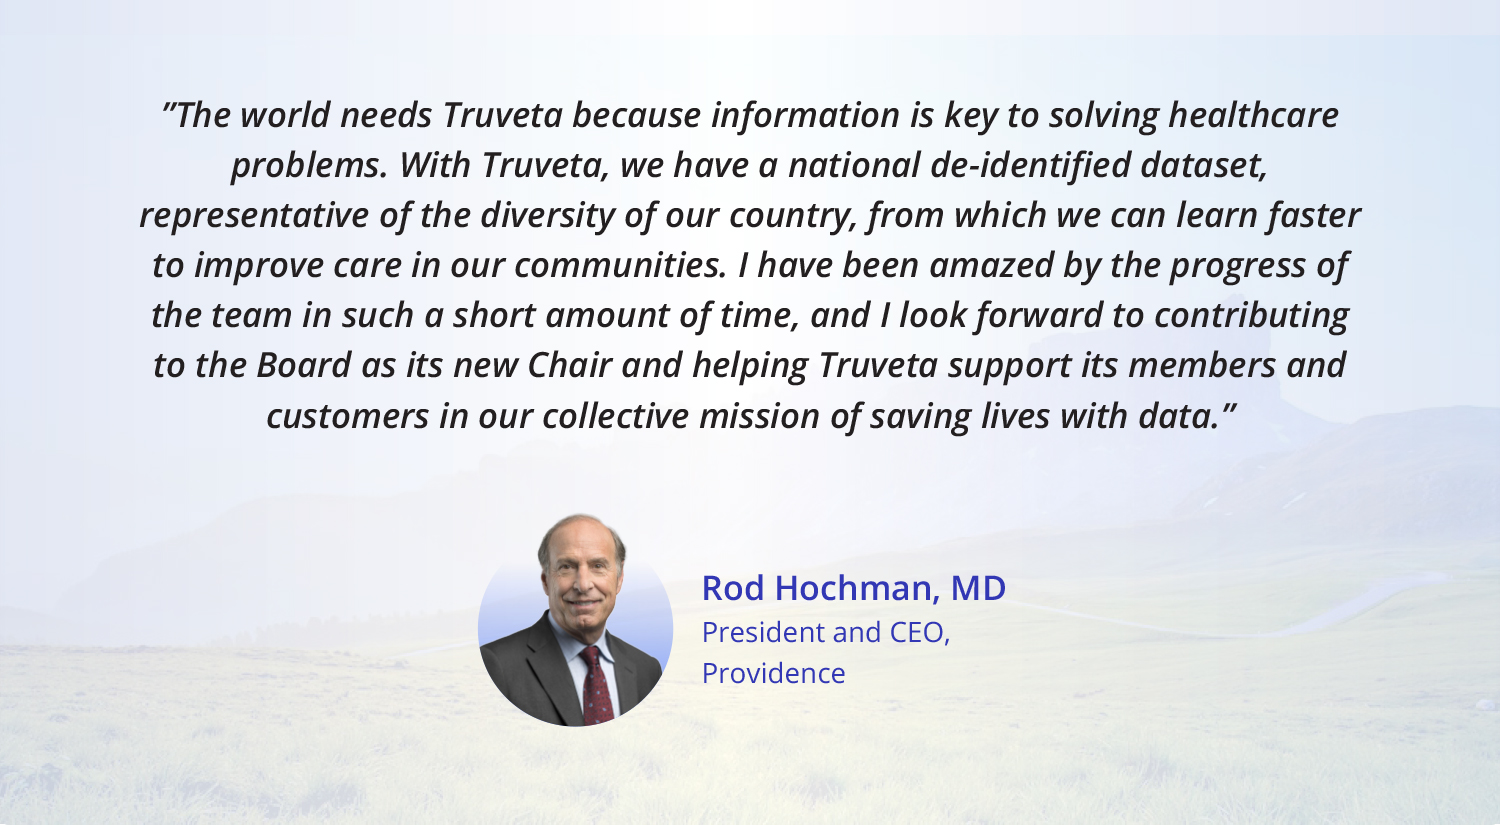 Truveta welcomes Rod Hochman, MD, president and CEO, Providence, as its new Board of Directors Chair